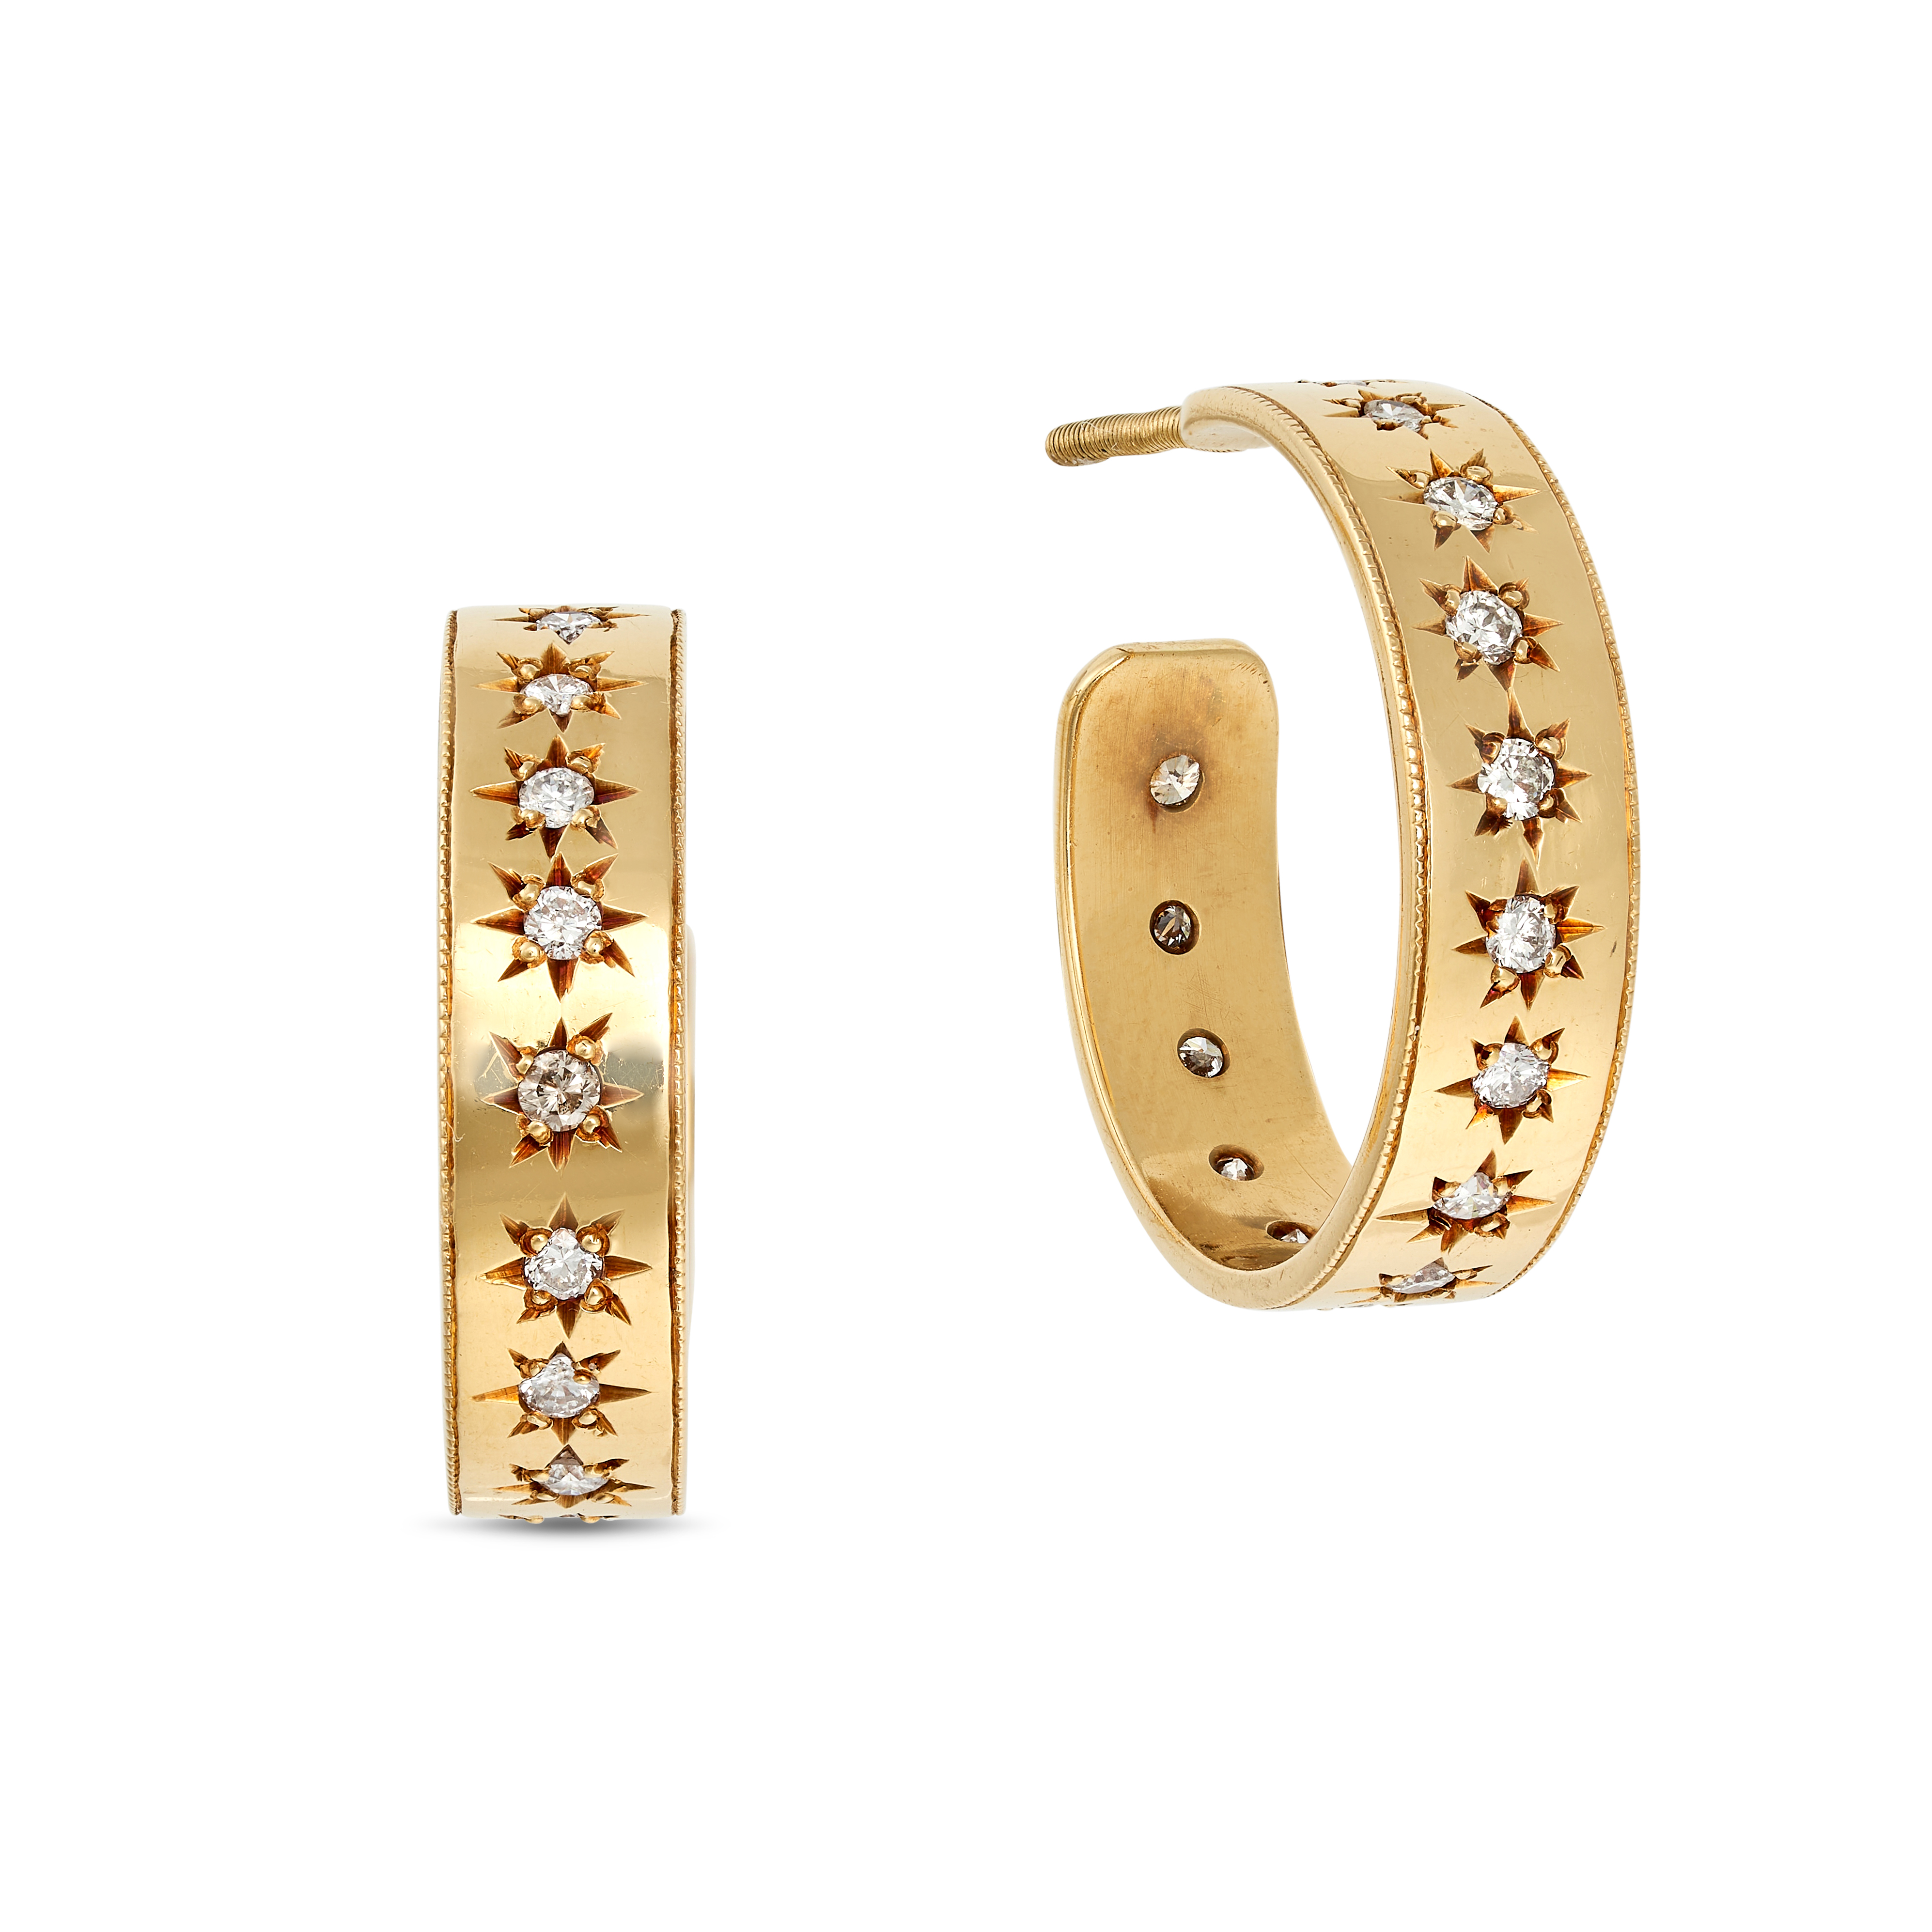 A PAIR OF DIAMOND HOOP EARRINGS in 18ct yellow gold, each set with a row of round brilliant cut d...